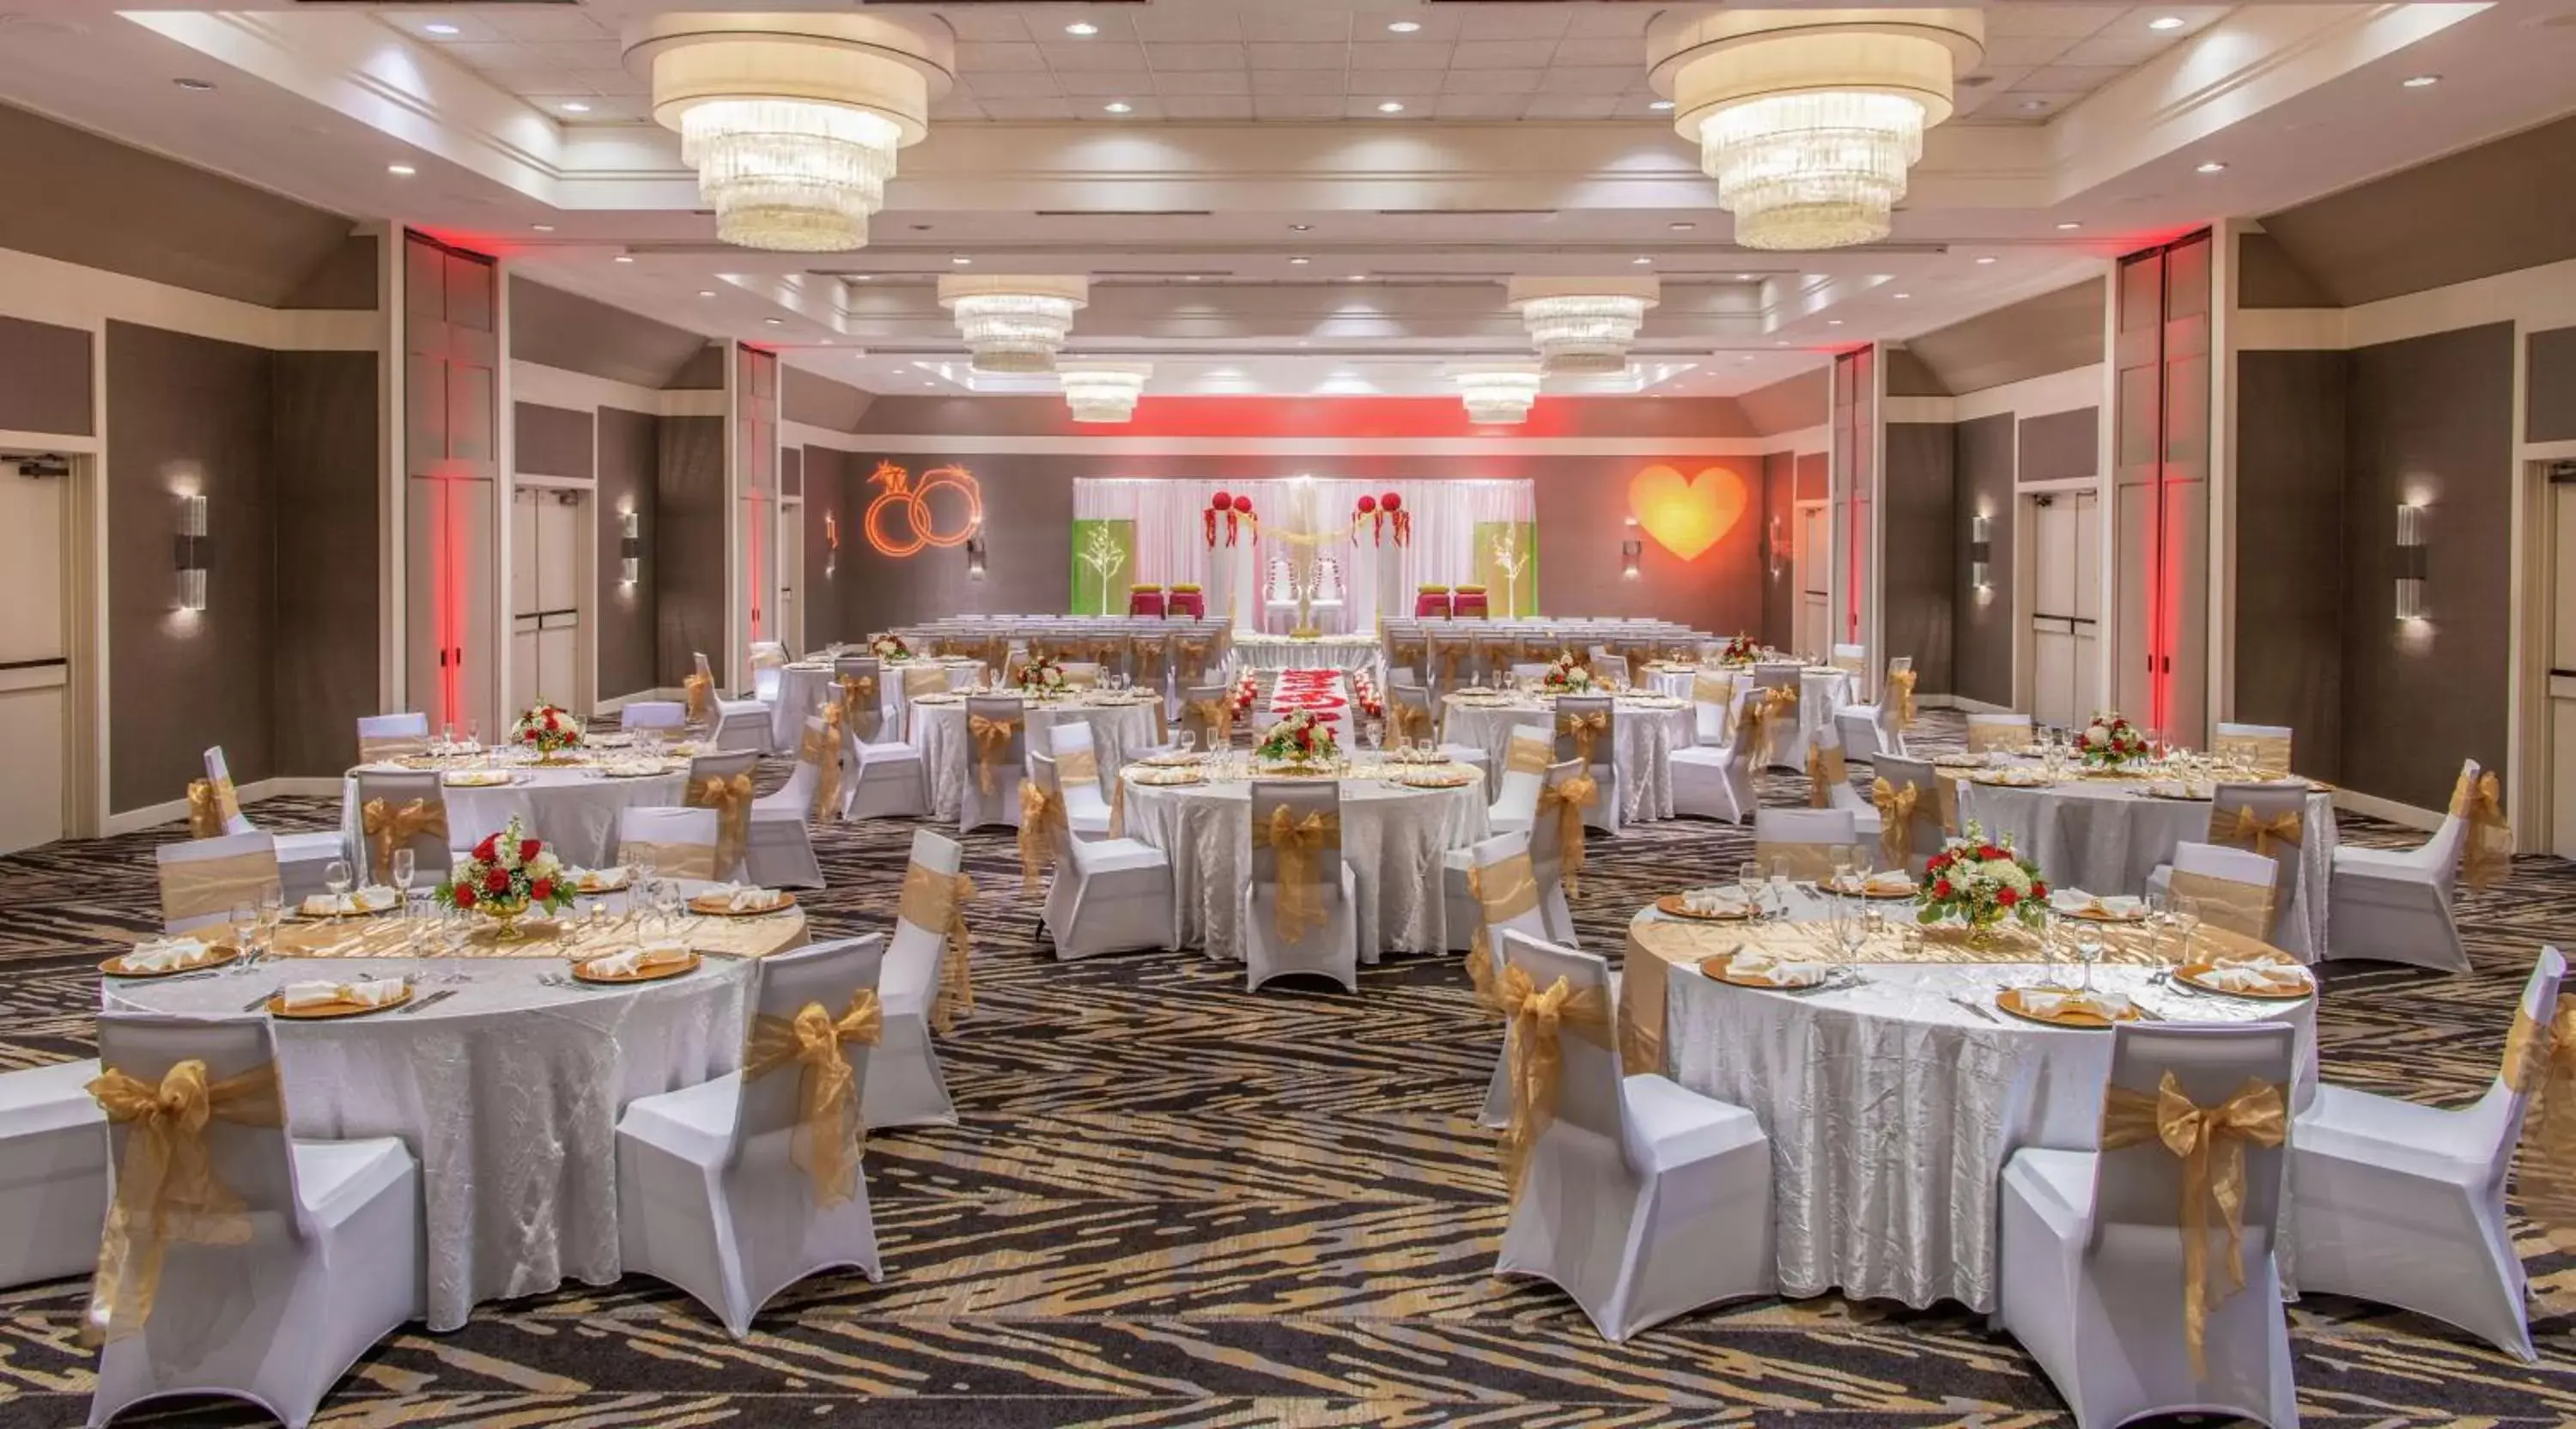 Meeting/conference room, Banquet Facilities in Hilton Tampa Airport Westshore